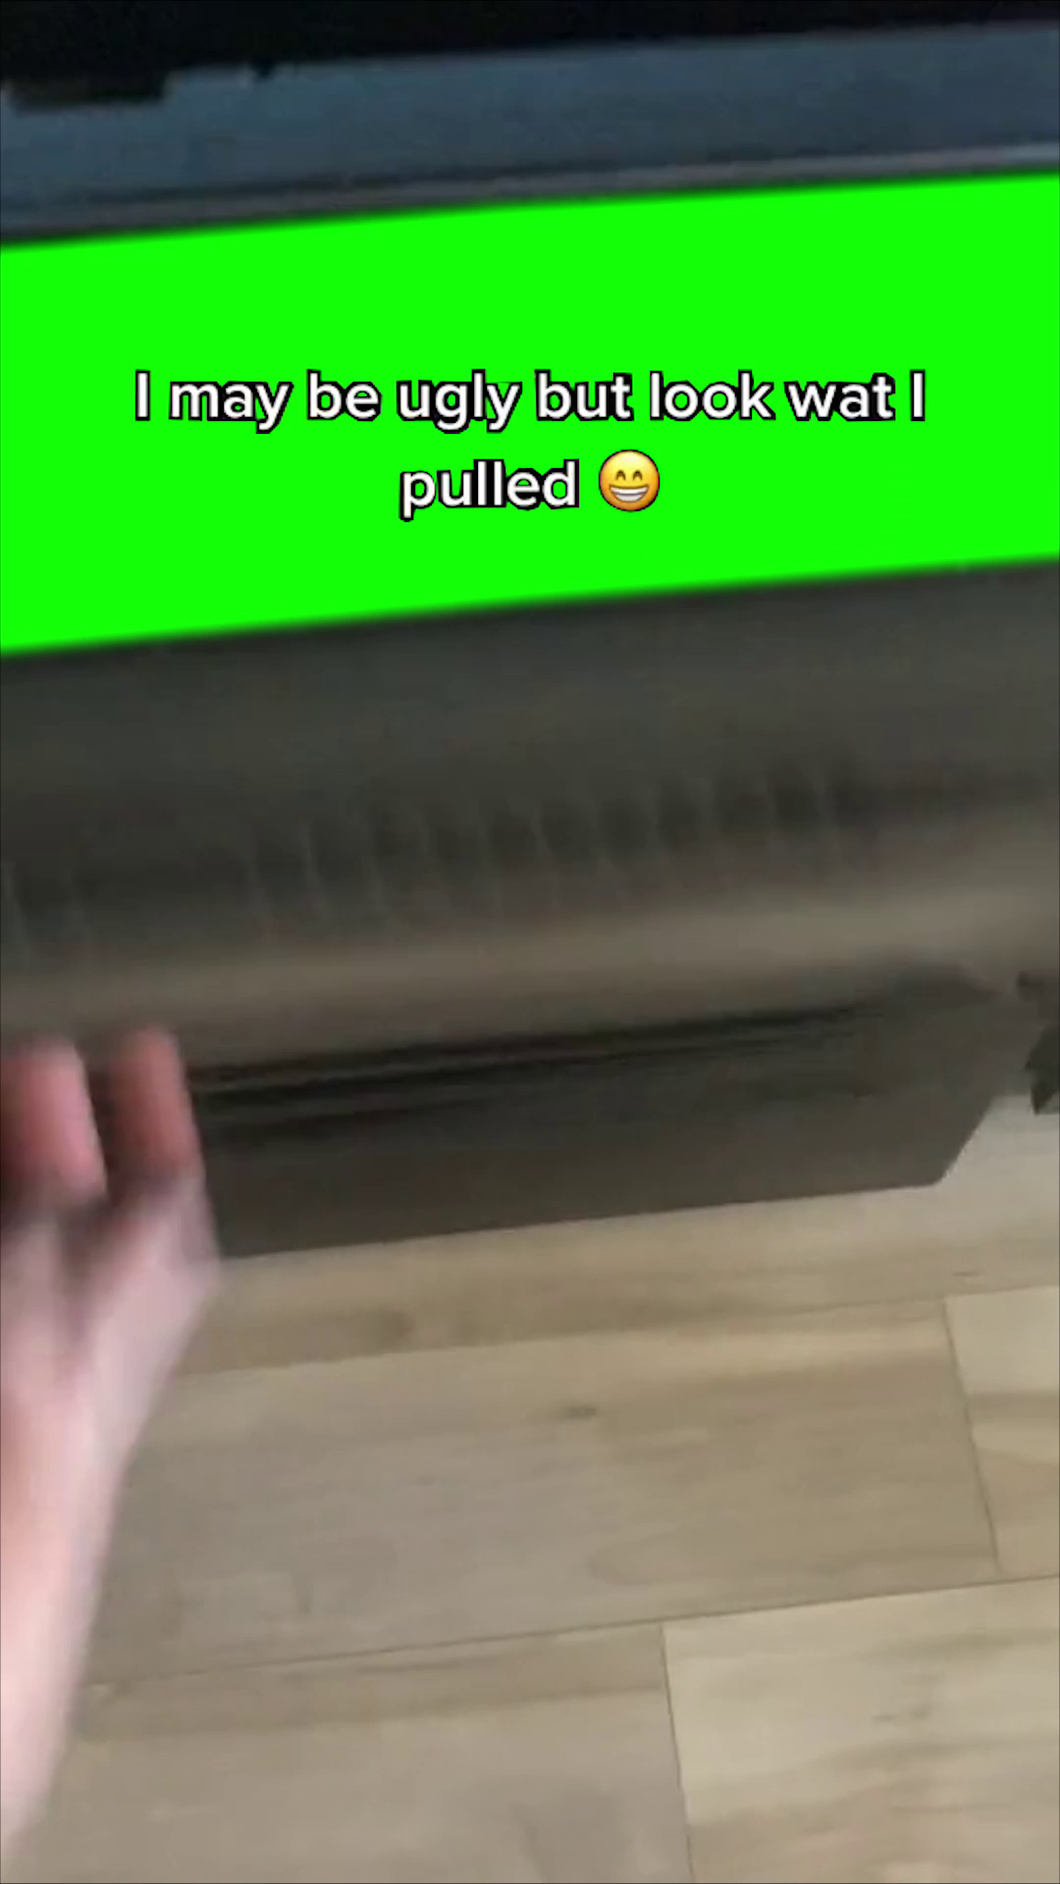 Oven Explosion Jumpscare (Green Screen)